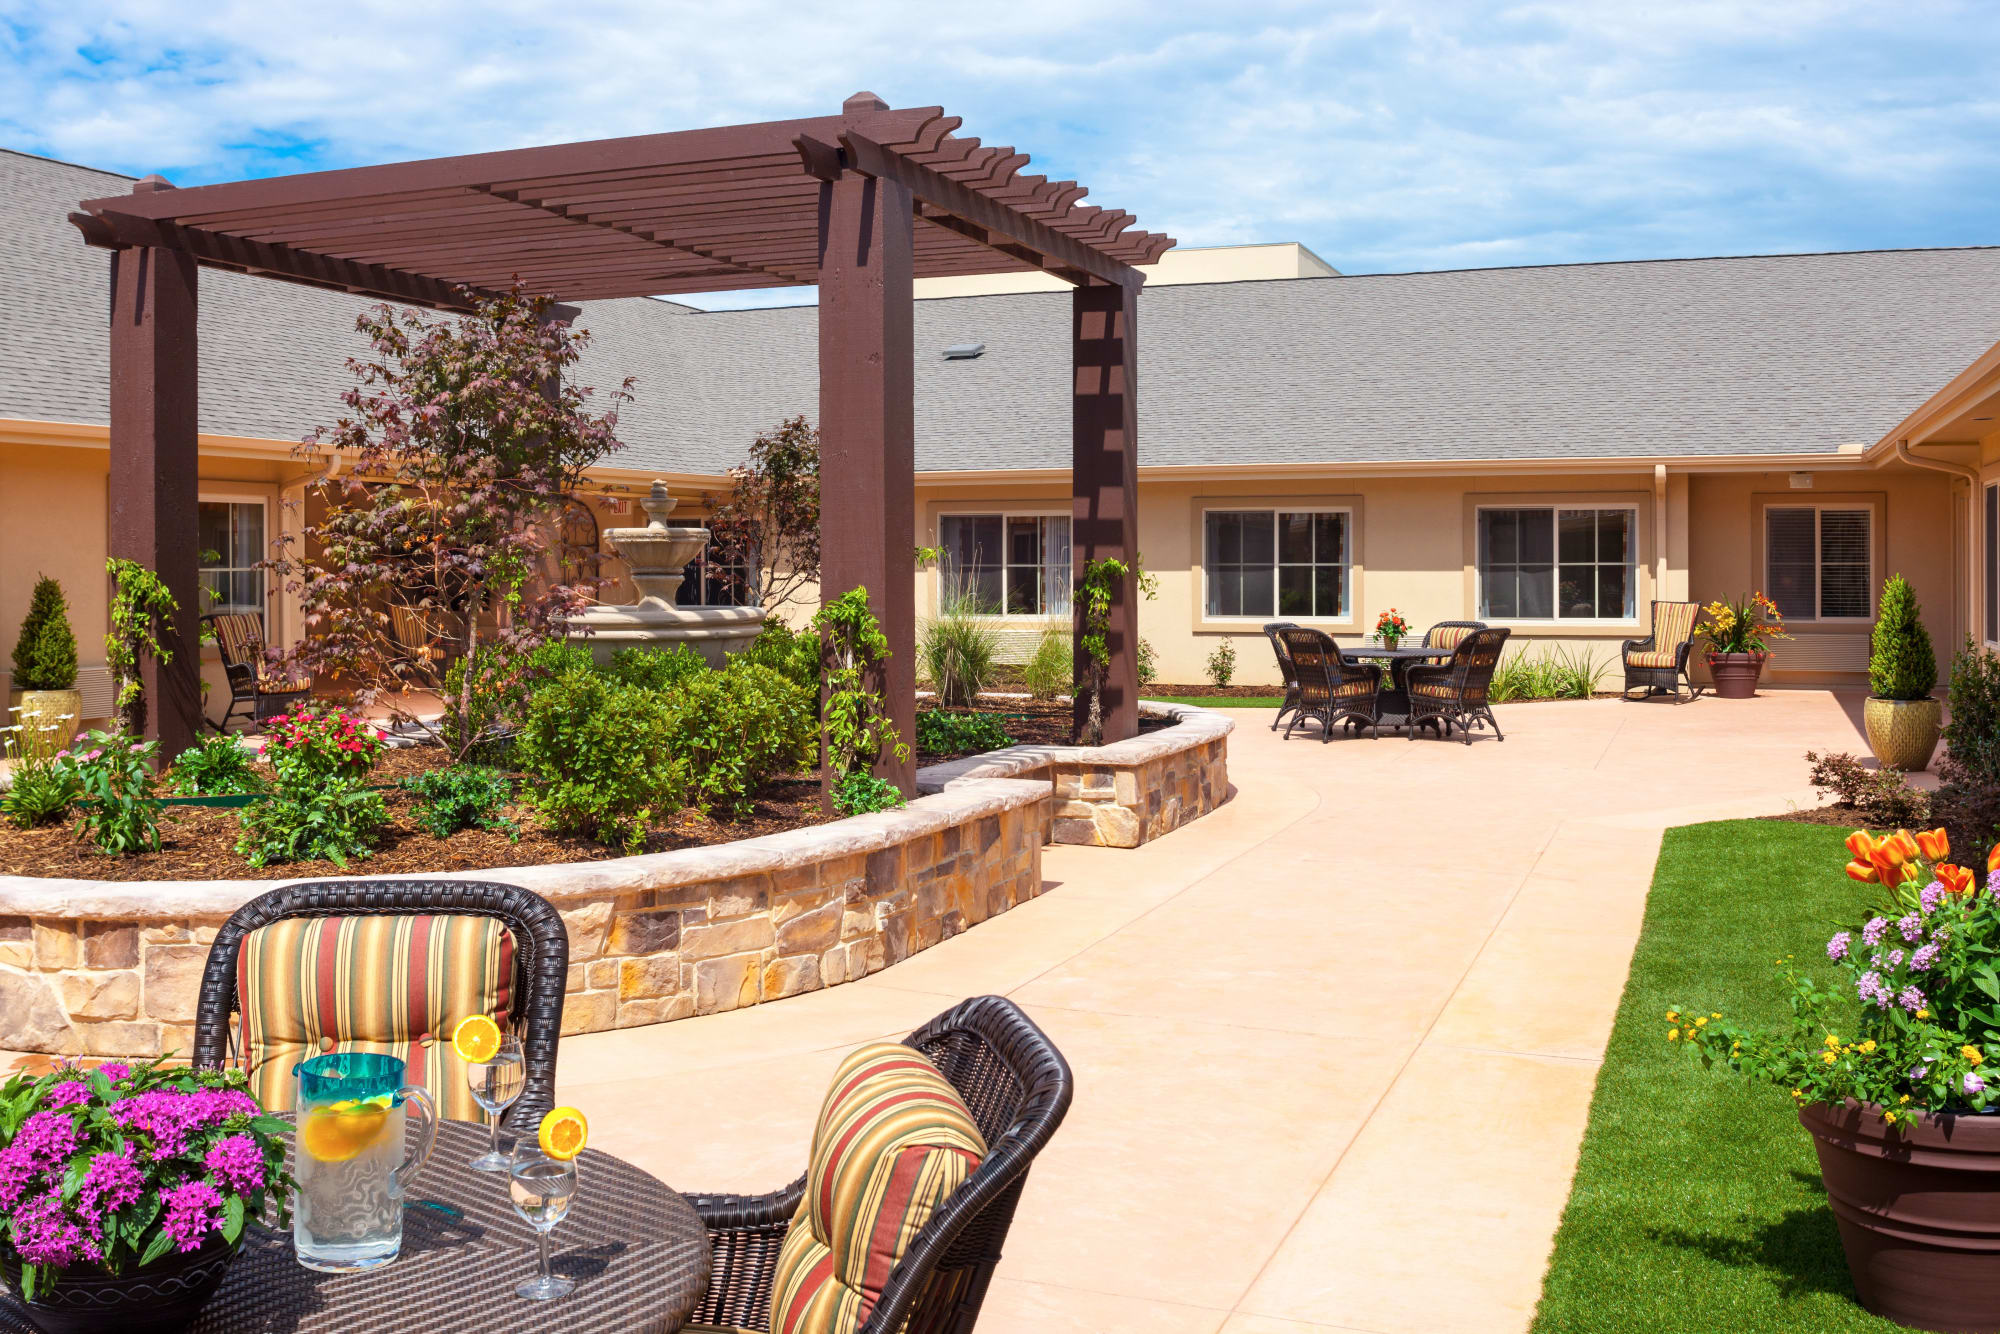 Paved patio with a community garden at Saddlebrook Oxford Memory Care in Frisco, Texas